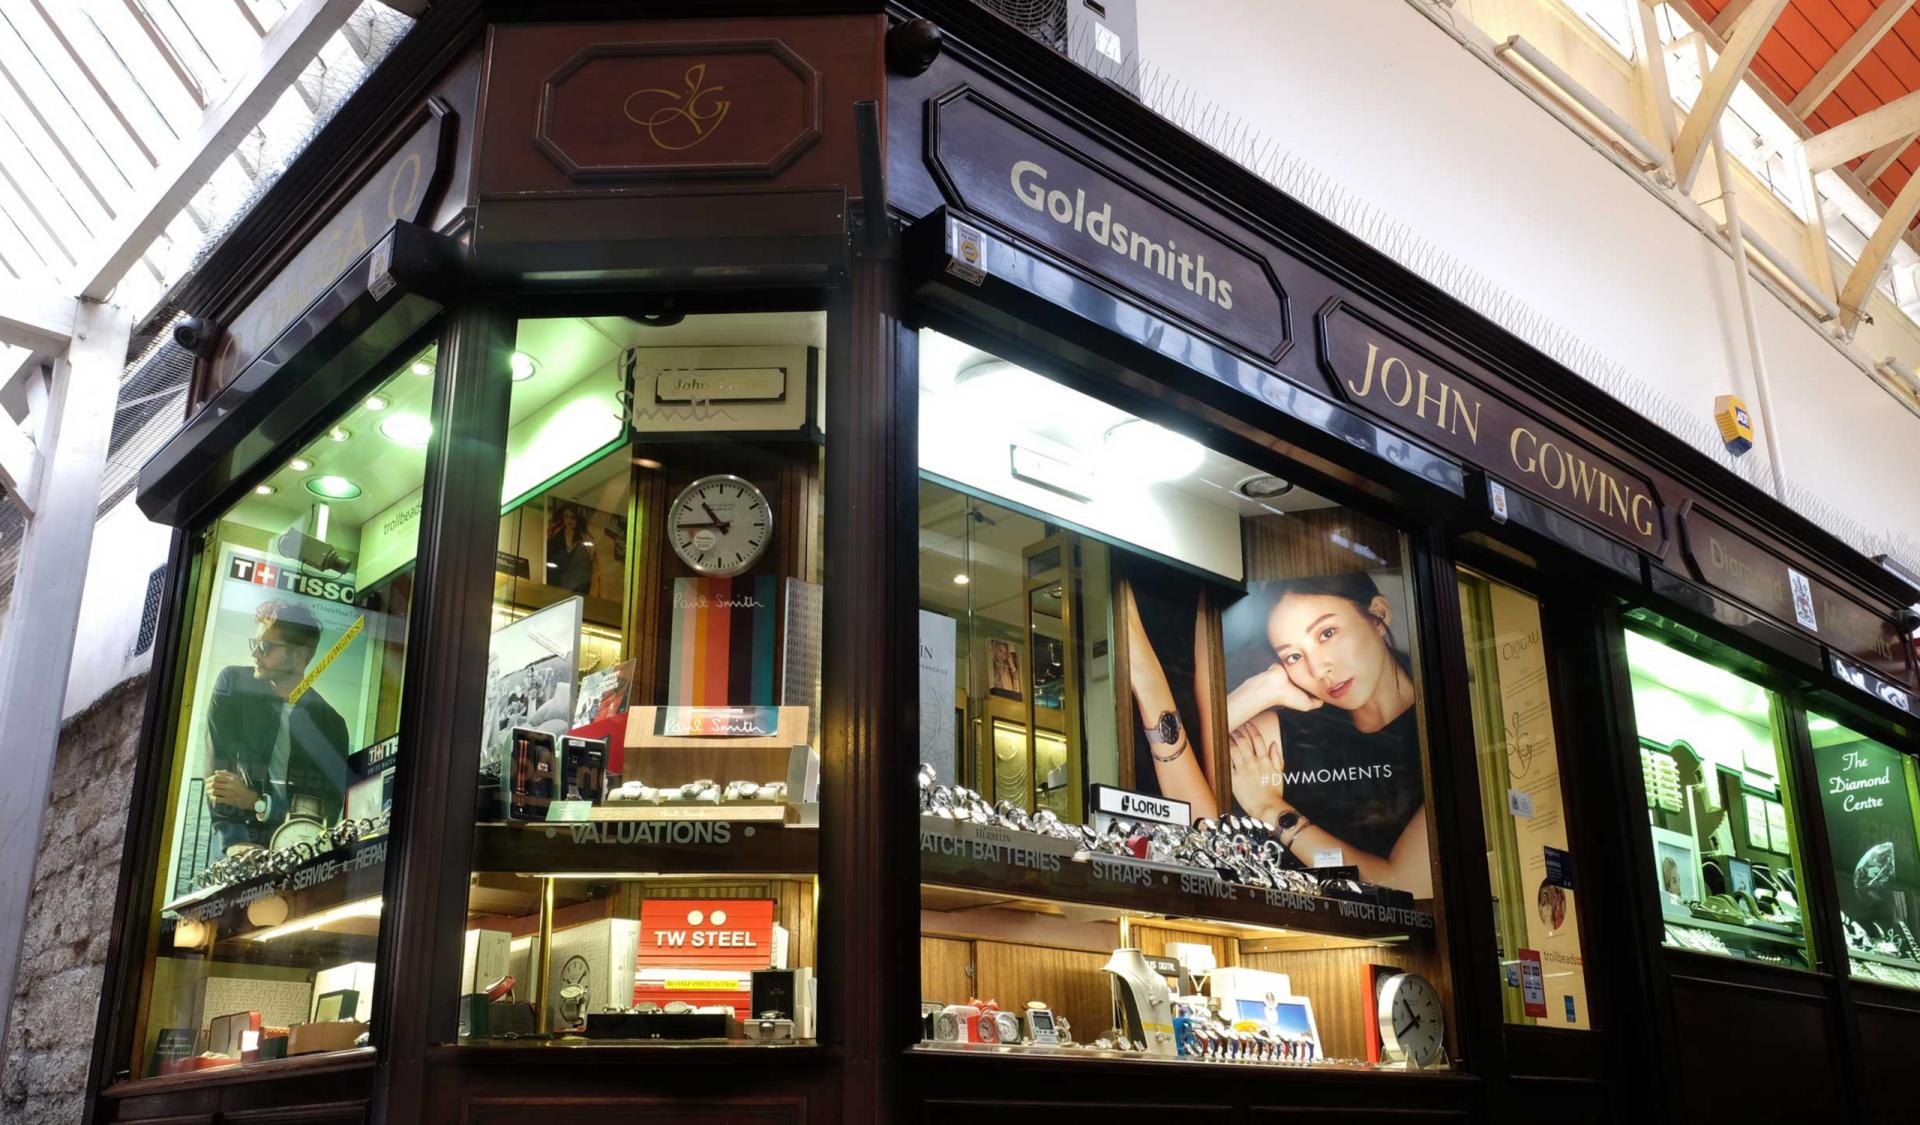 The exterior of John Gowing Jewellers shop in Oxford's Covered Market